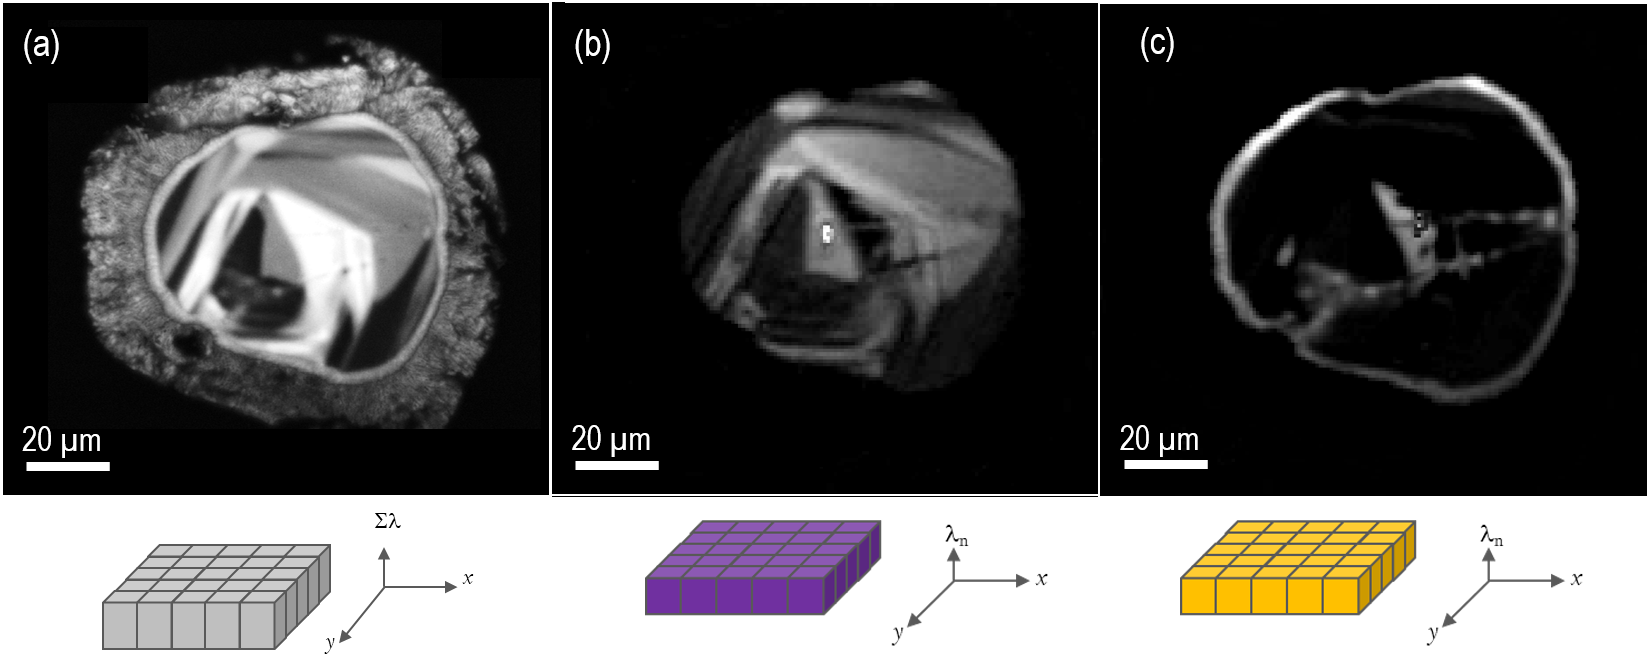 CL images of the same zircon as shown in Figure 2. Image a) unfiltered CL image revealing internal texture, b) and c) wavelength-filtered CL images at 404 and 575 nm respectively corresponding to Er3+ and Dy3+ trace rare-earth ions; the wavelength-filtered images have been processed by removal of the ZrSiO4 background signal at 650 nm. The Er3+ and Dy3+ concentrations were in the range 10 – 300 ppm, as determined by microanalysis in the electron probe microanalyzer. Schematic representations of the acquisition modes used are displayed immediately below the respective CL image.